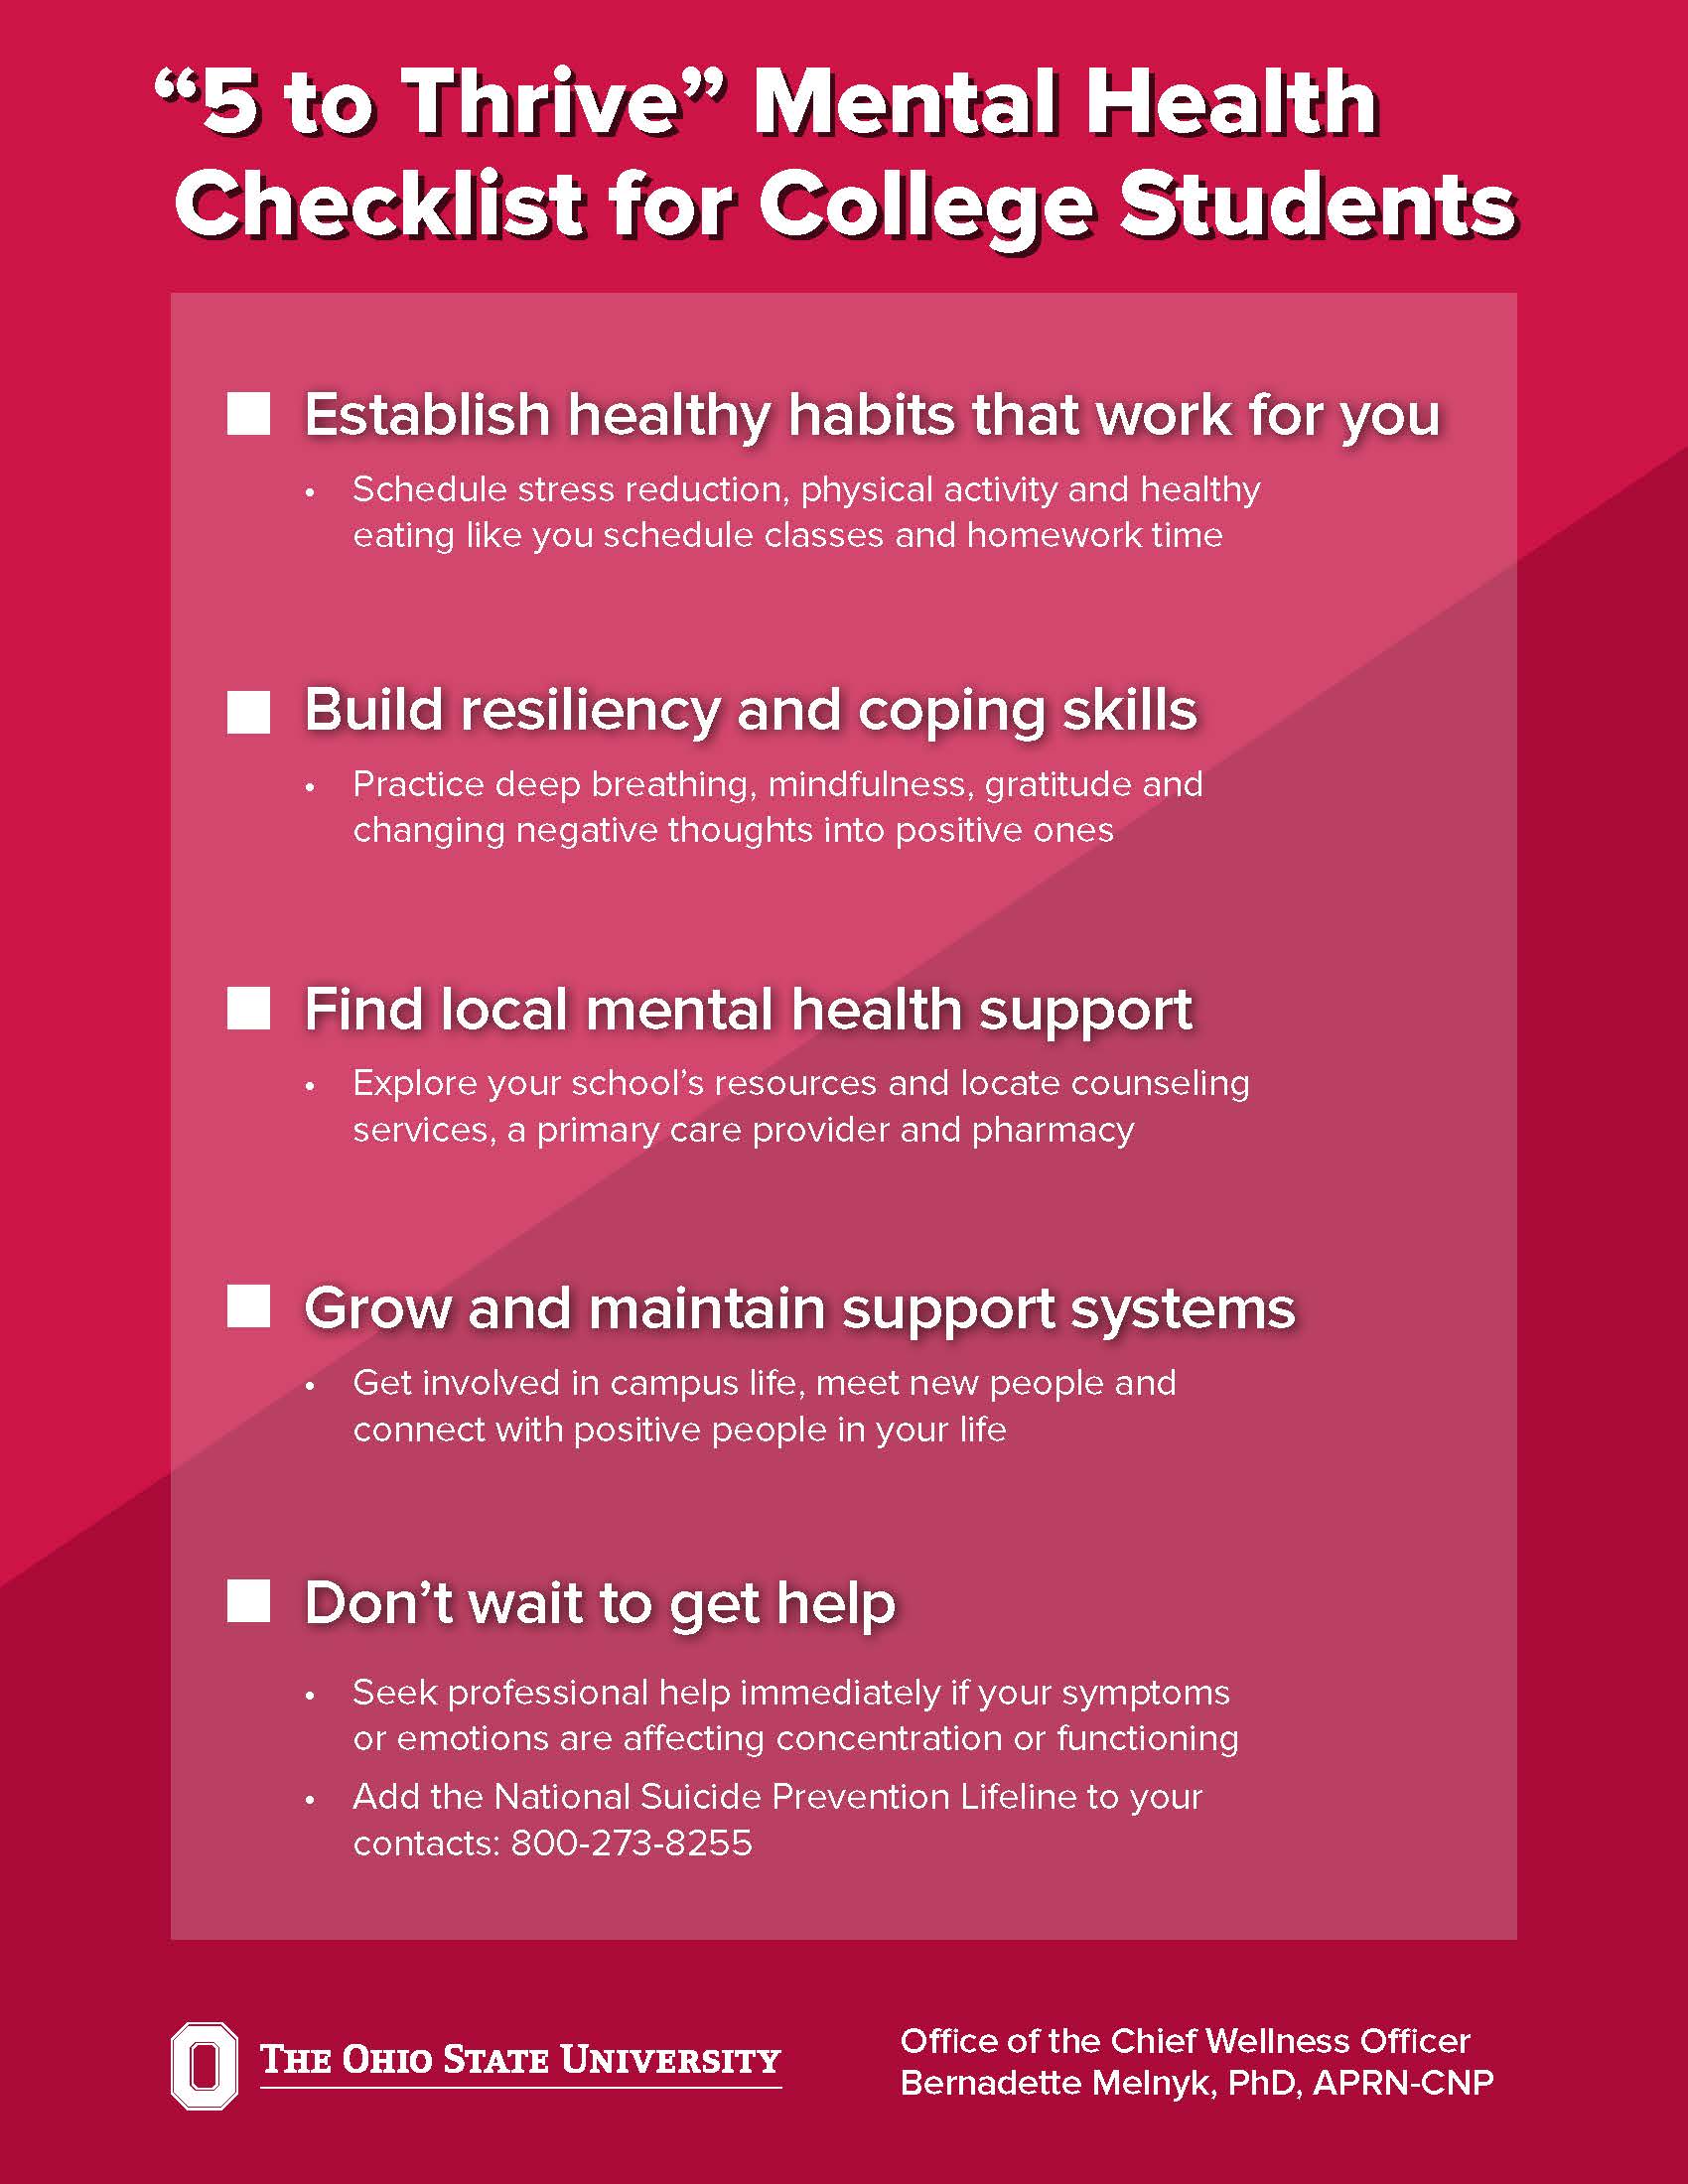 5 to Thrive Mental Health Checklist for College Students